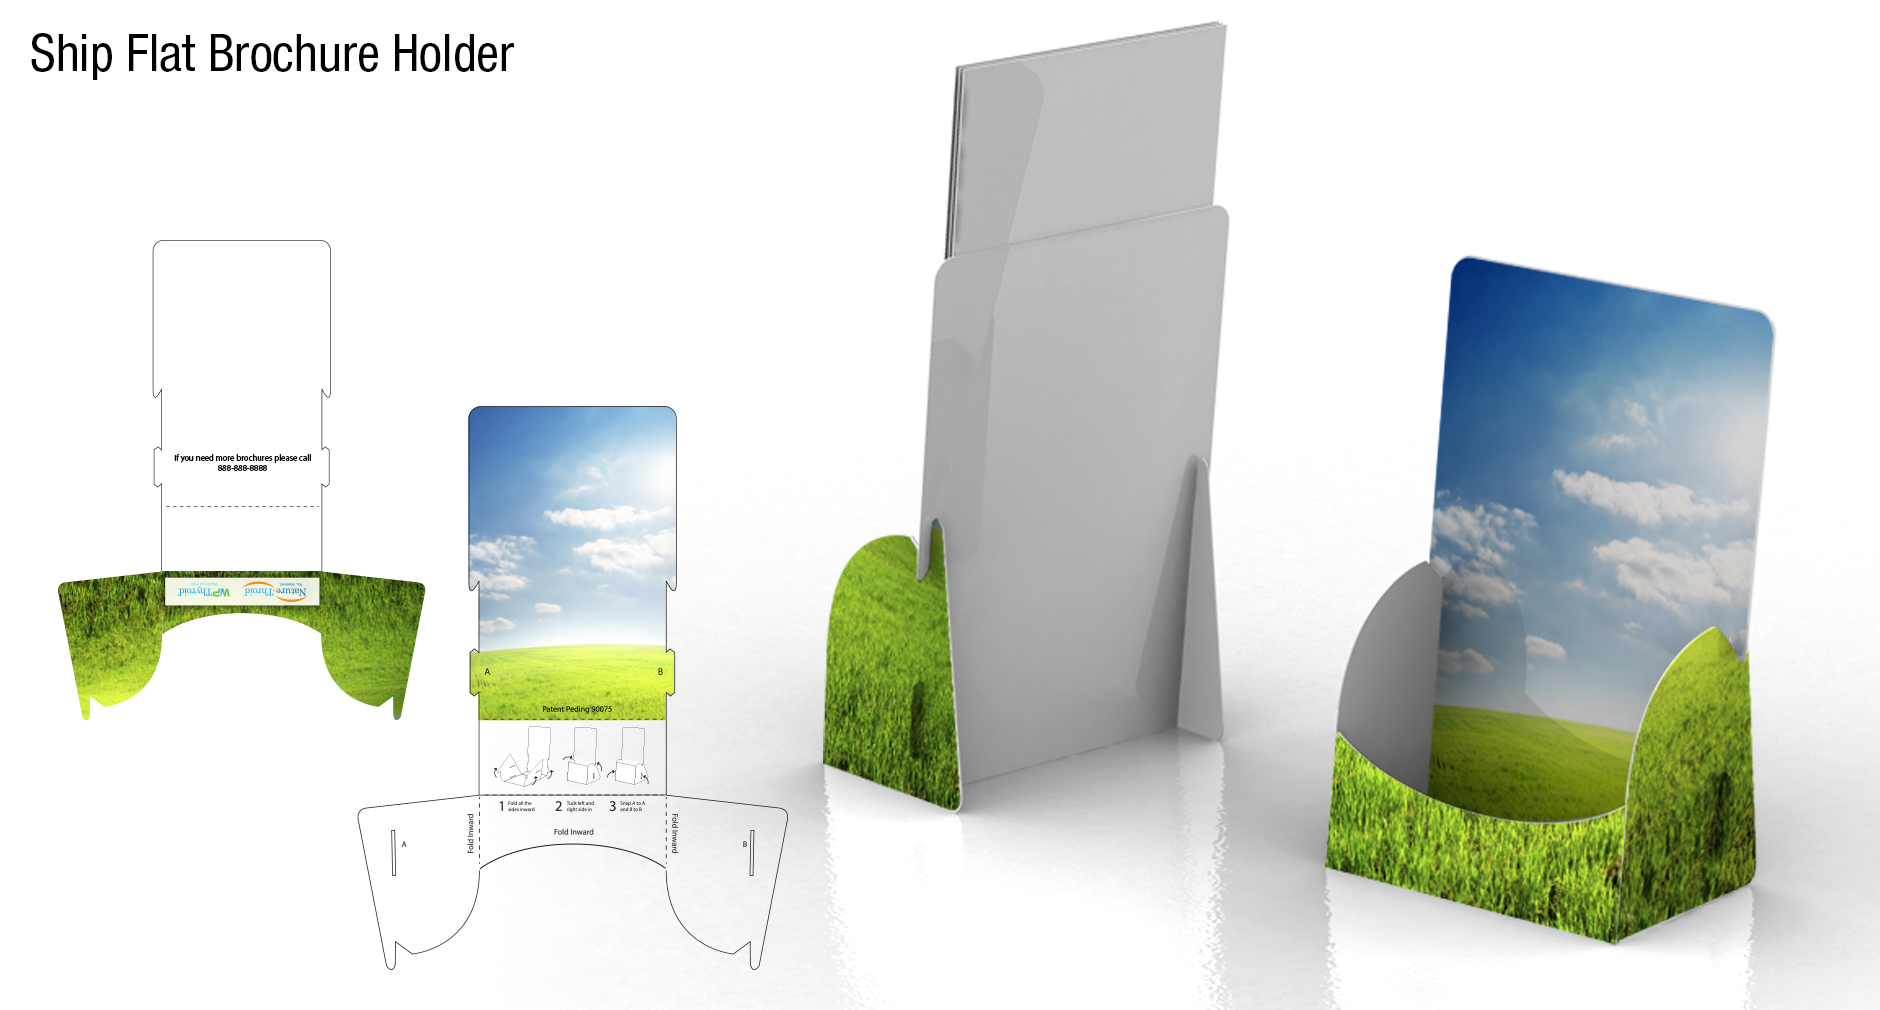 Custom brochure holder printed full color with your artwork.